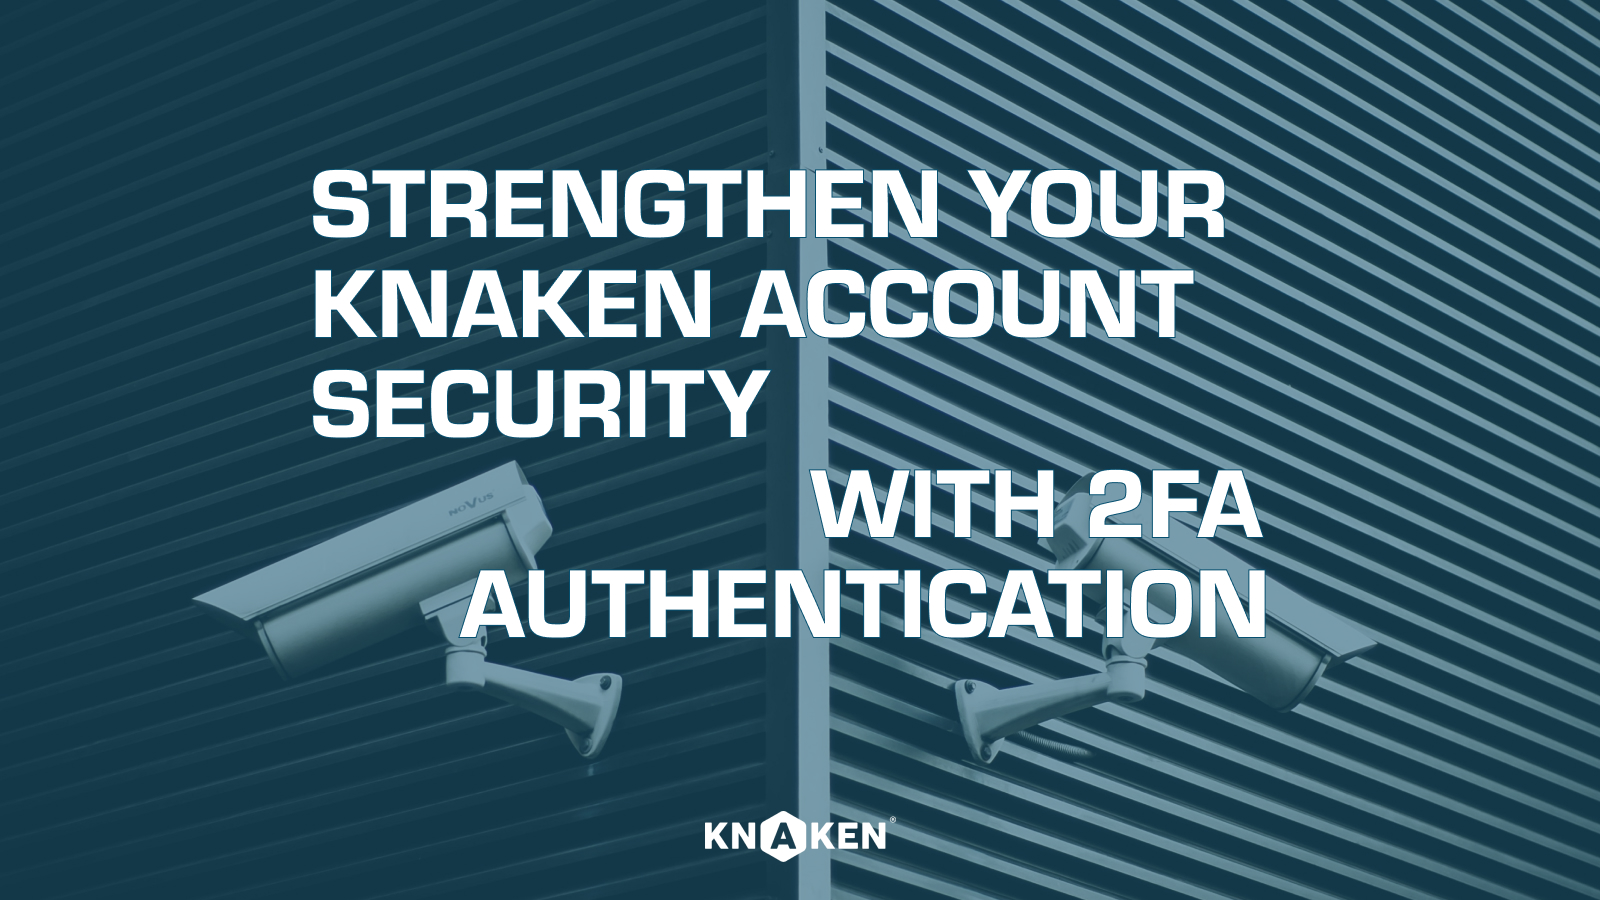 Strengthen your Knaken account security with 2FA Authentication